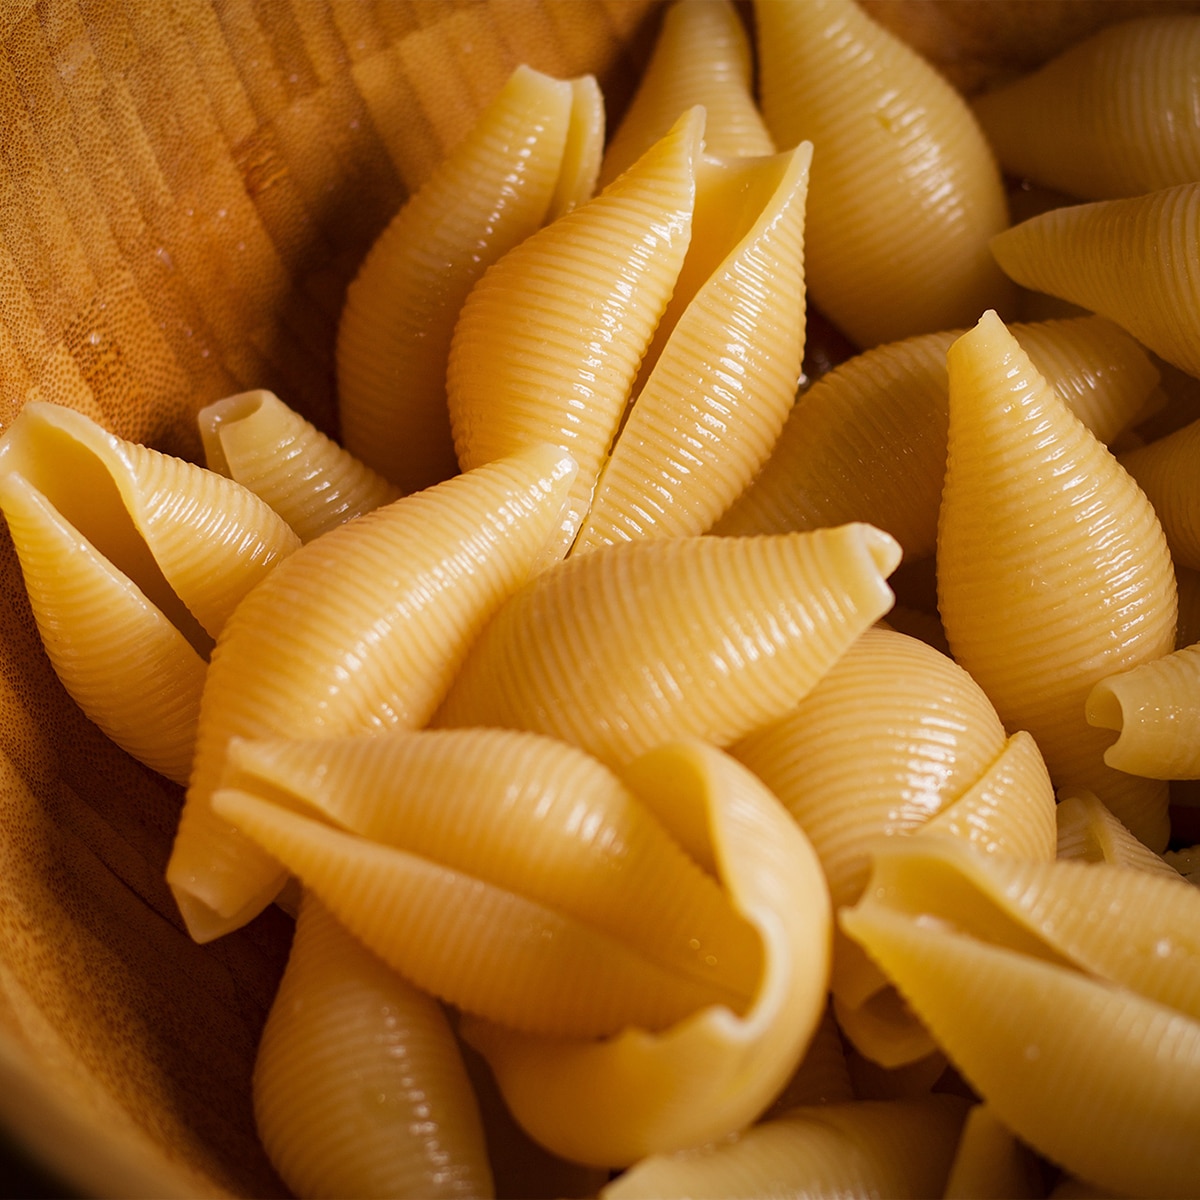 Partially cooked pasta shells cooling in a wood bowl.